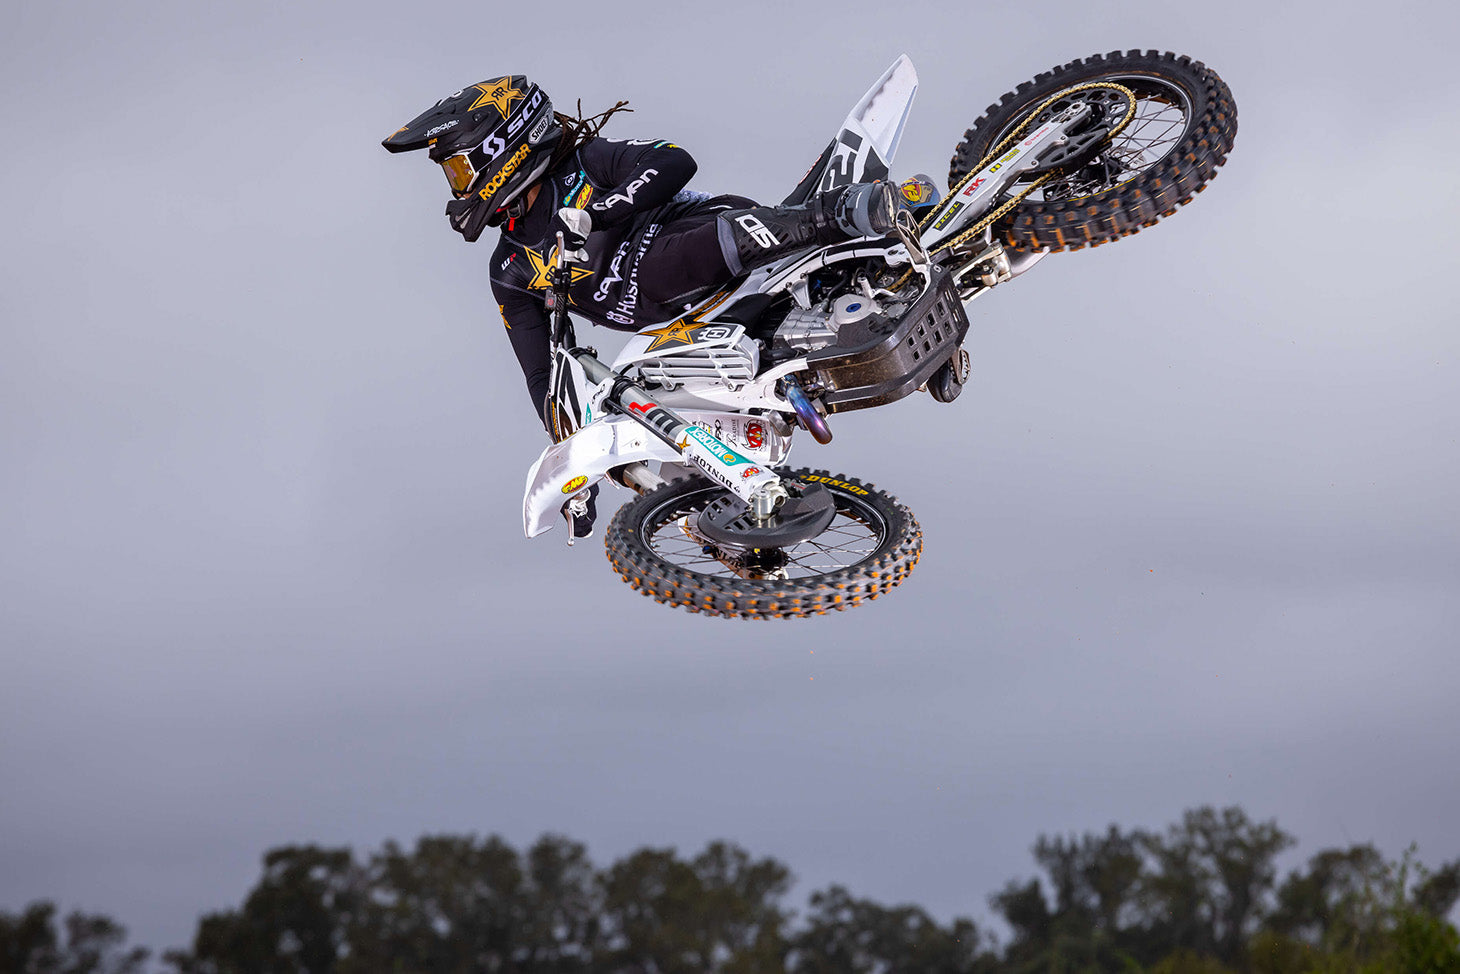 Motocross rider getting air over a jump